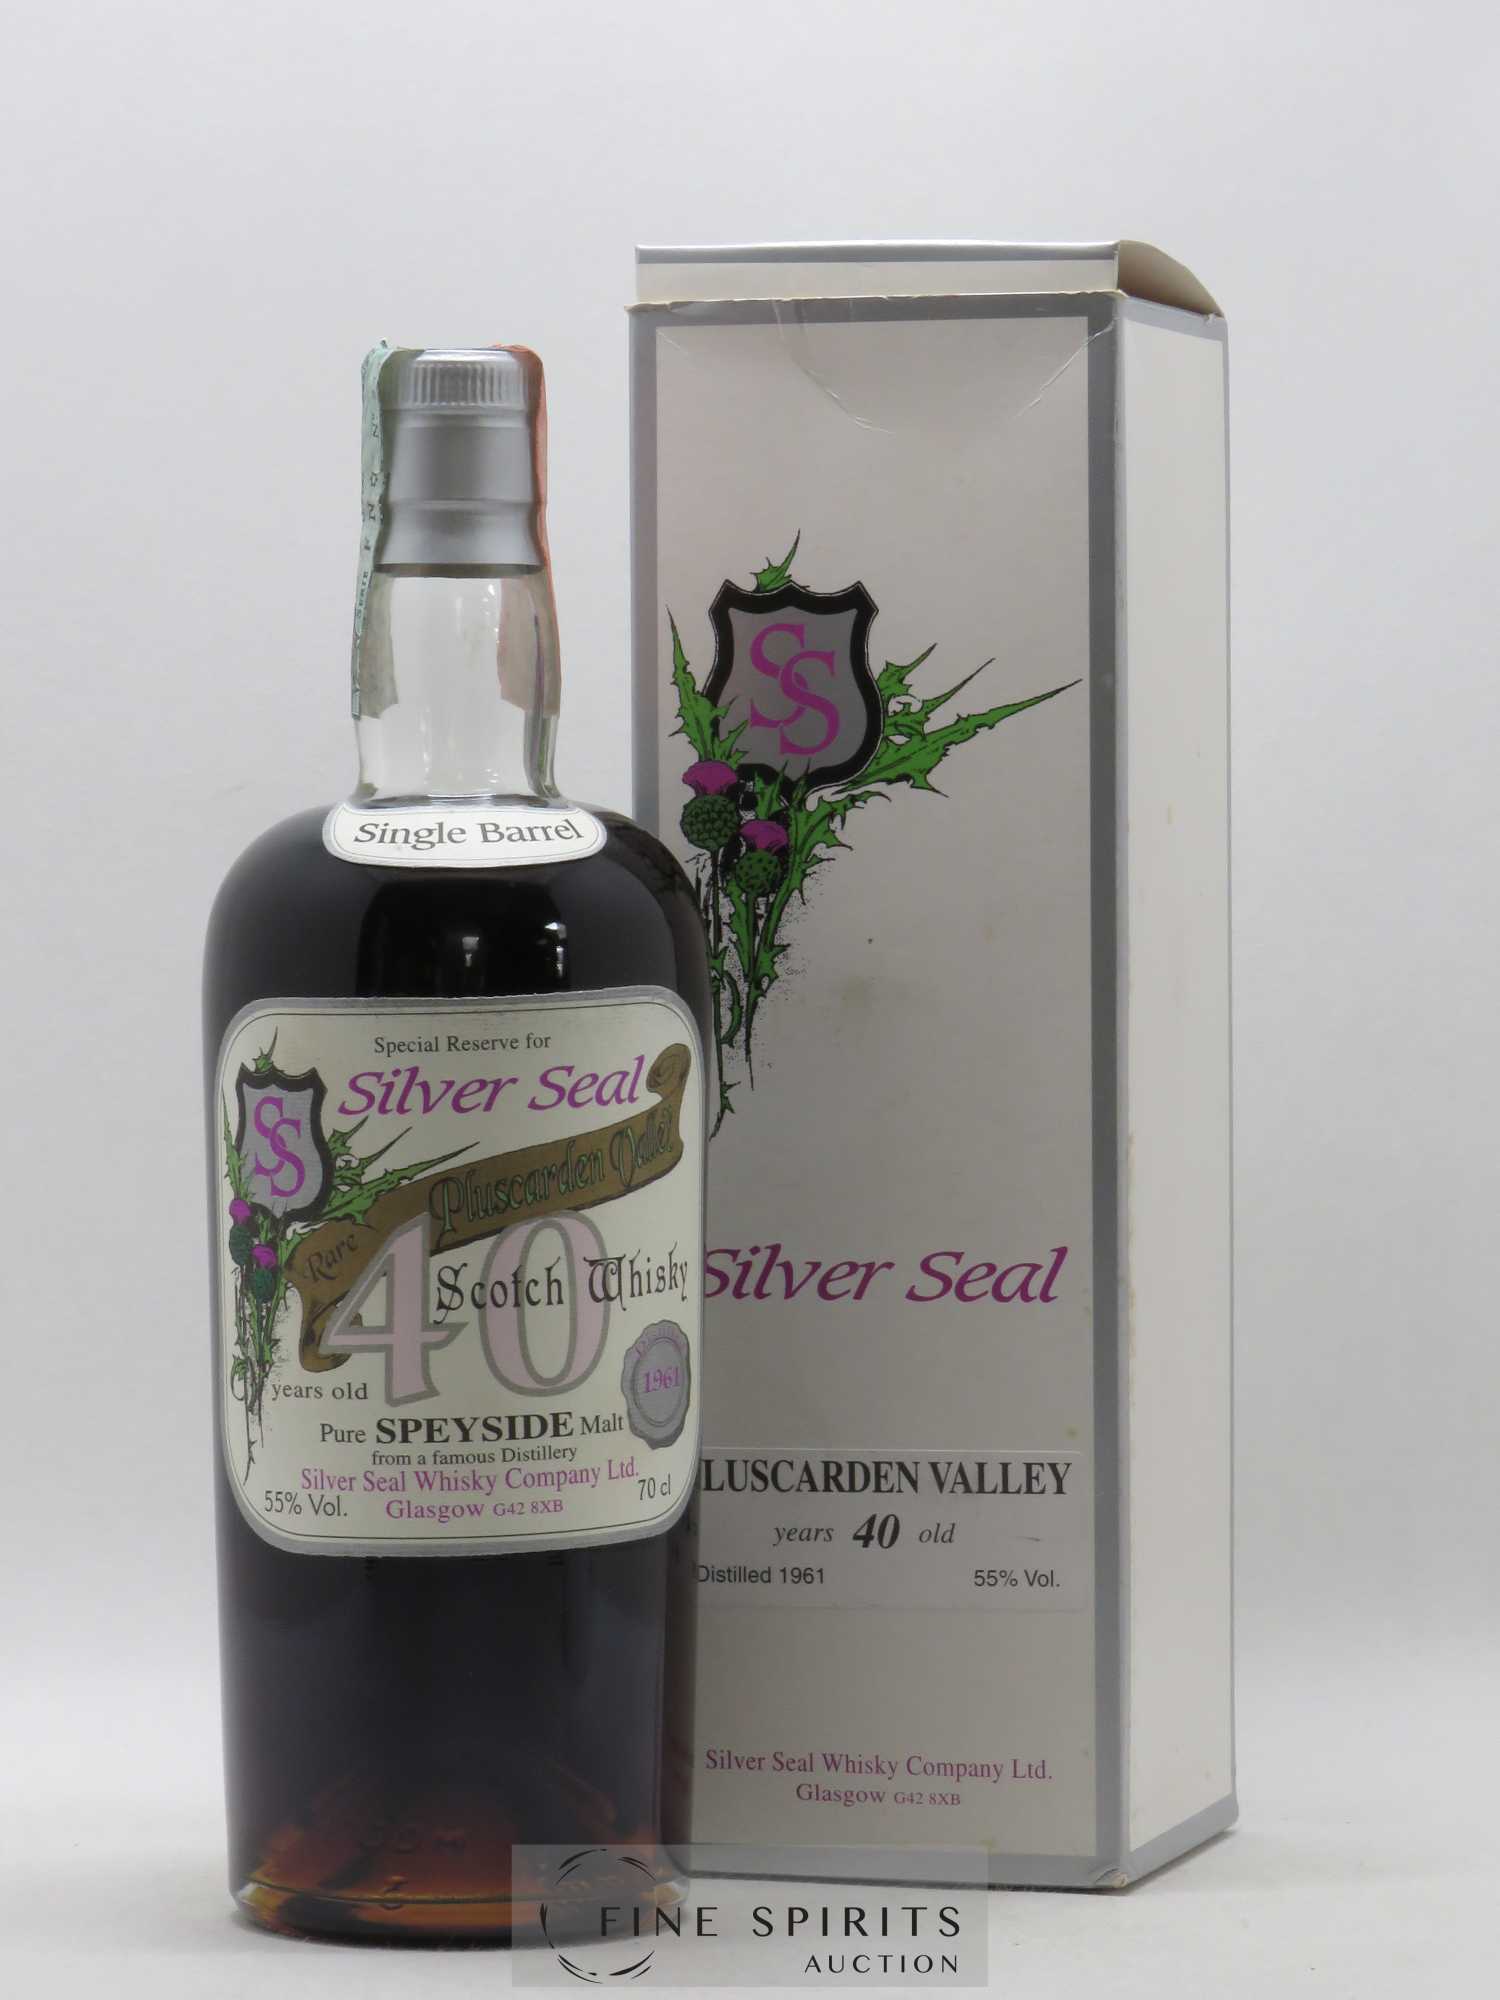 Pluscarden Valley 40 years 1961 Silver Seal Whisky Co Single Barrel Limited Edition 170 Bottles Special Reserve 